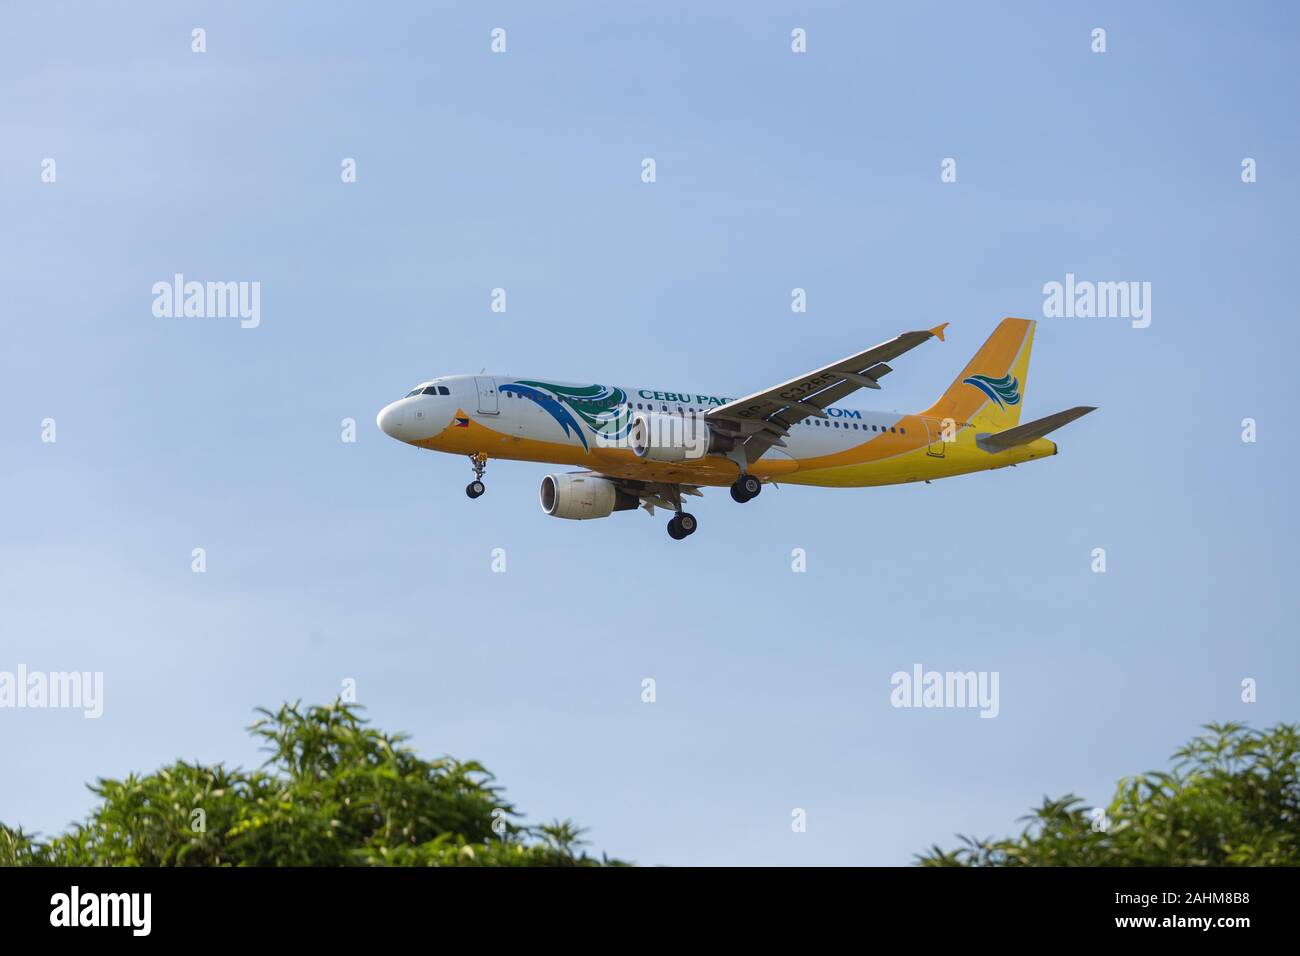 Pasay, Philippines - August 10, 2017: Cebu Pacific airbus a320 in finals for landing at Ninoy Aquino International Airport Stock Photo